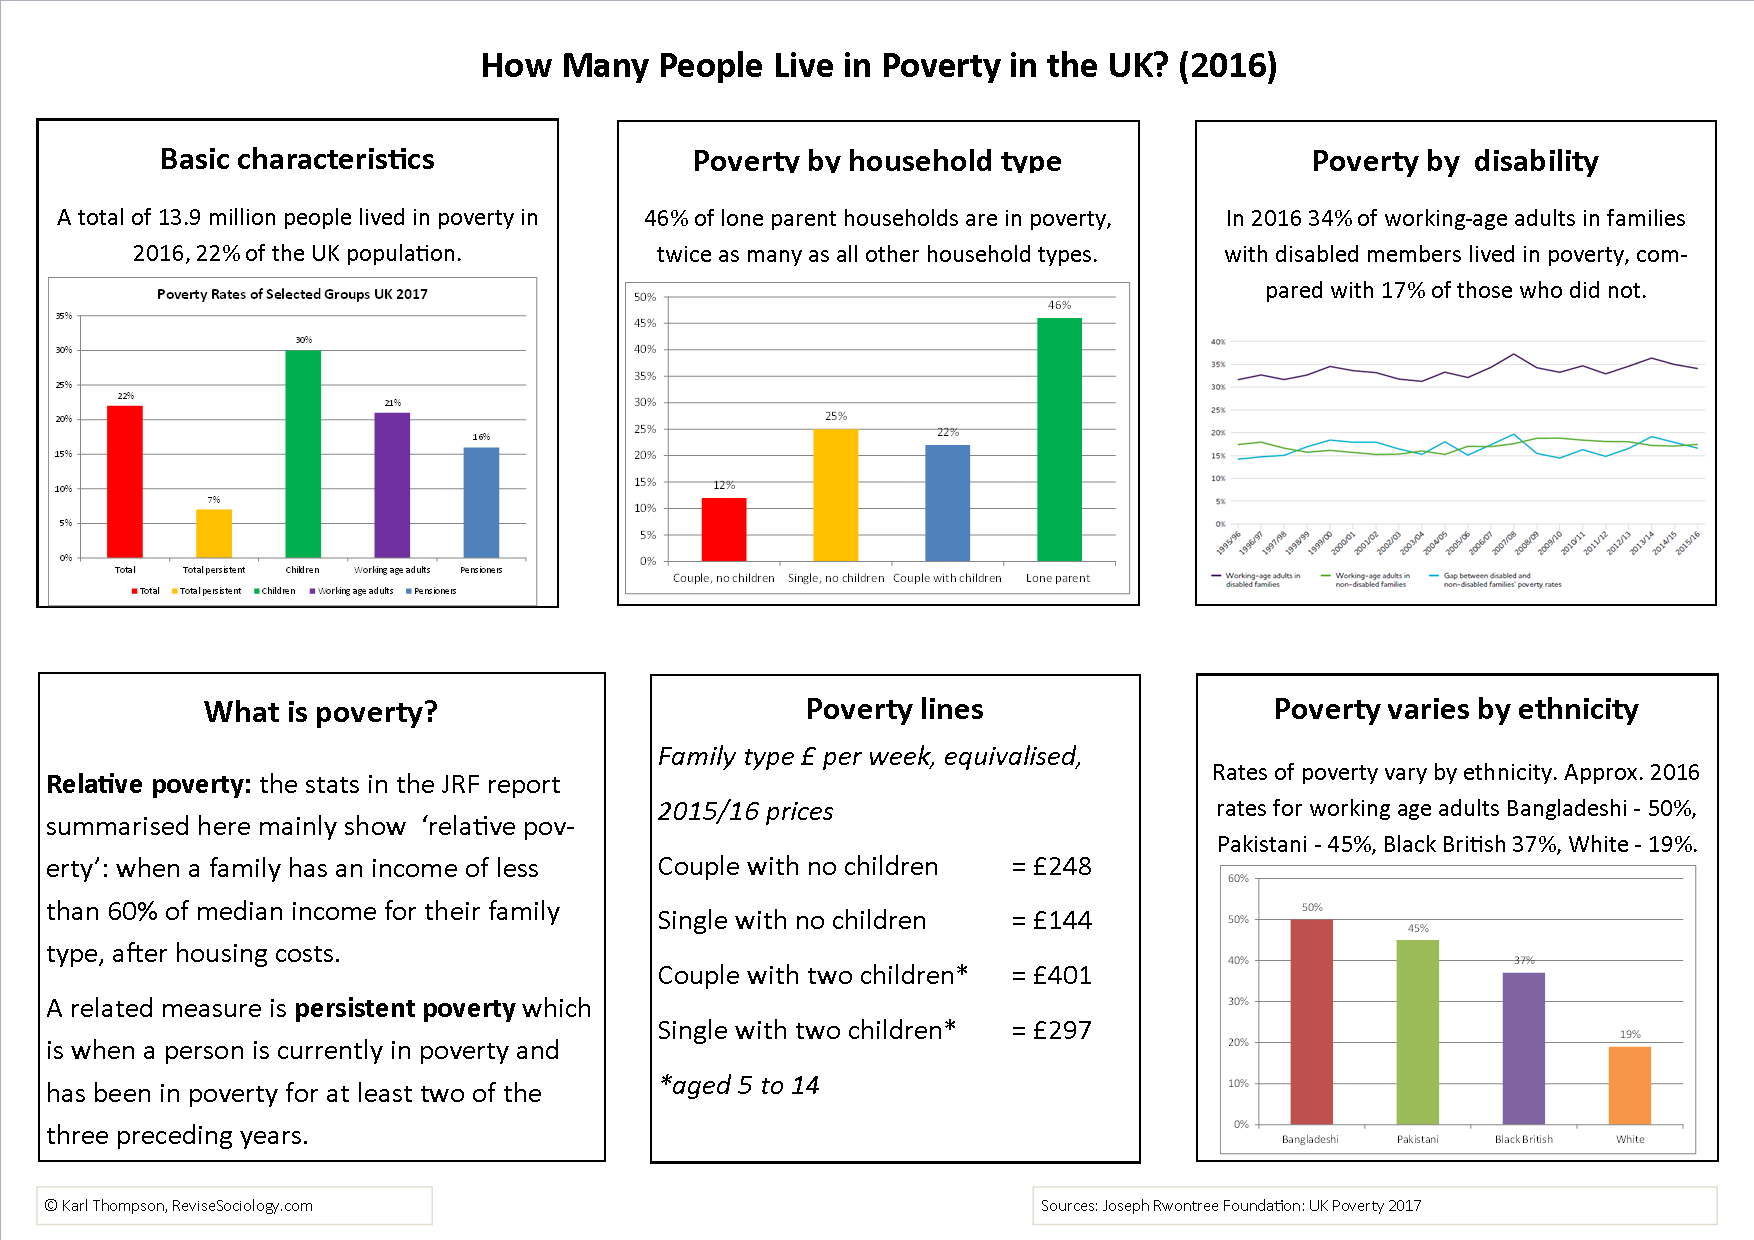 Who is Poor in the UK?